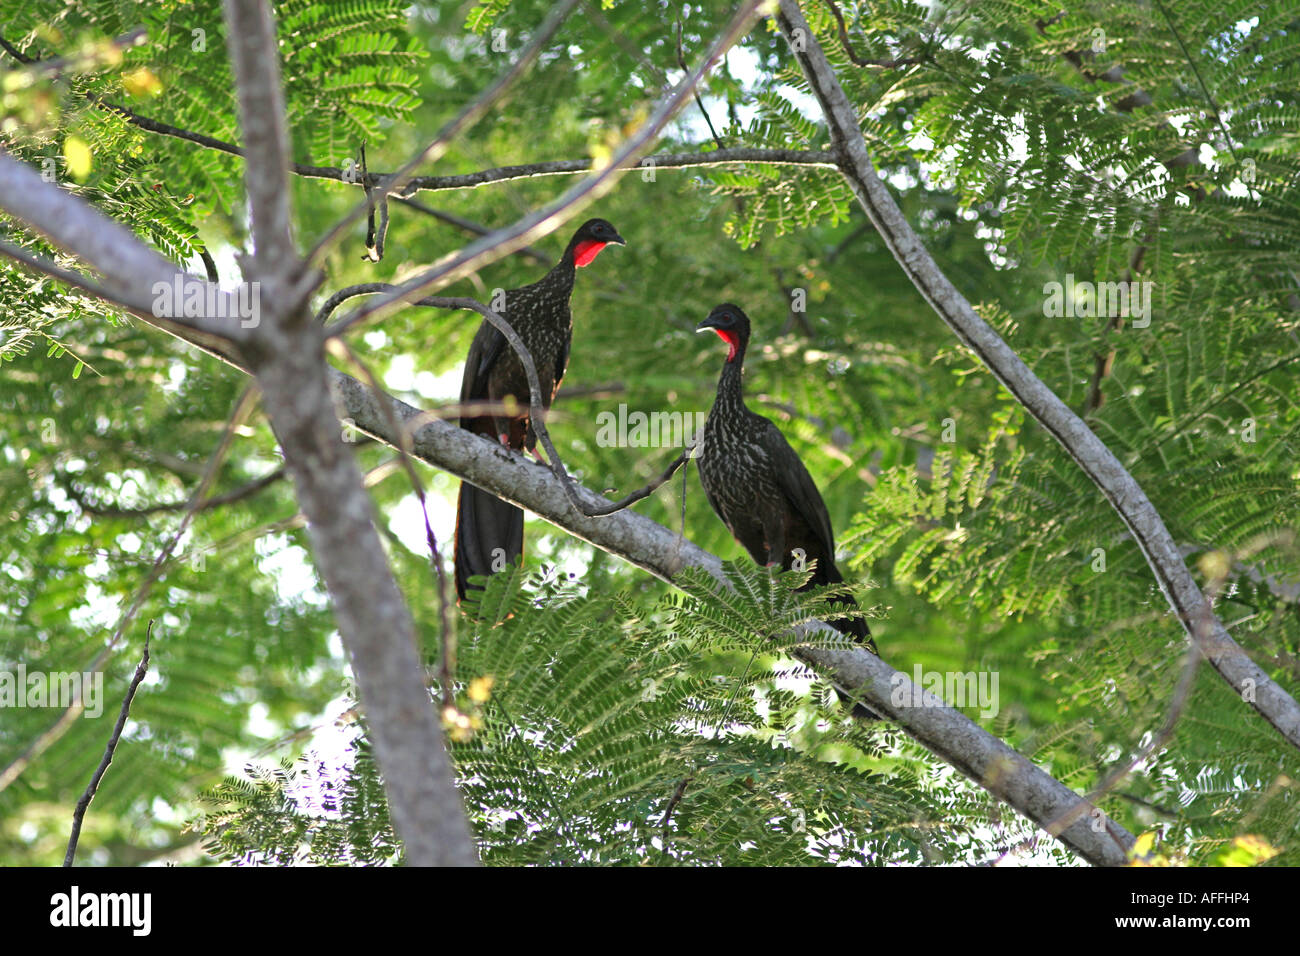 a pair of large black guans making courtship in the forest Stock Photo